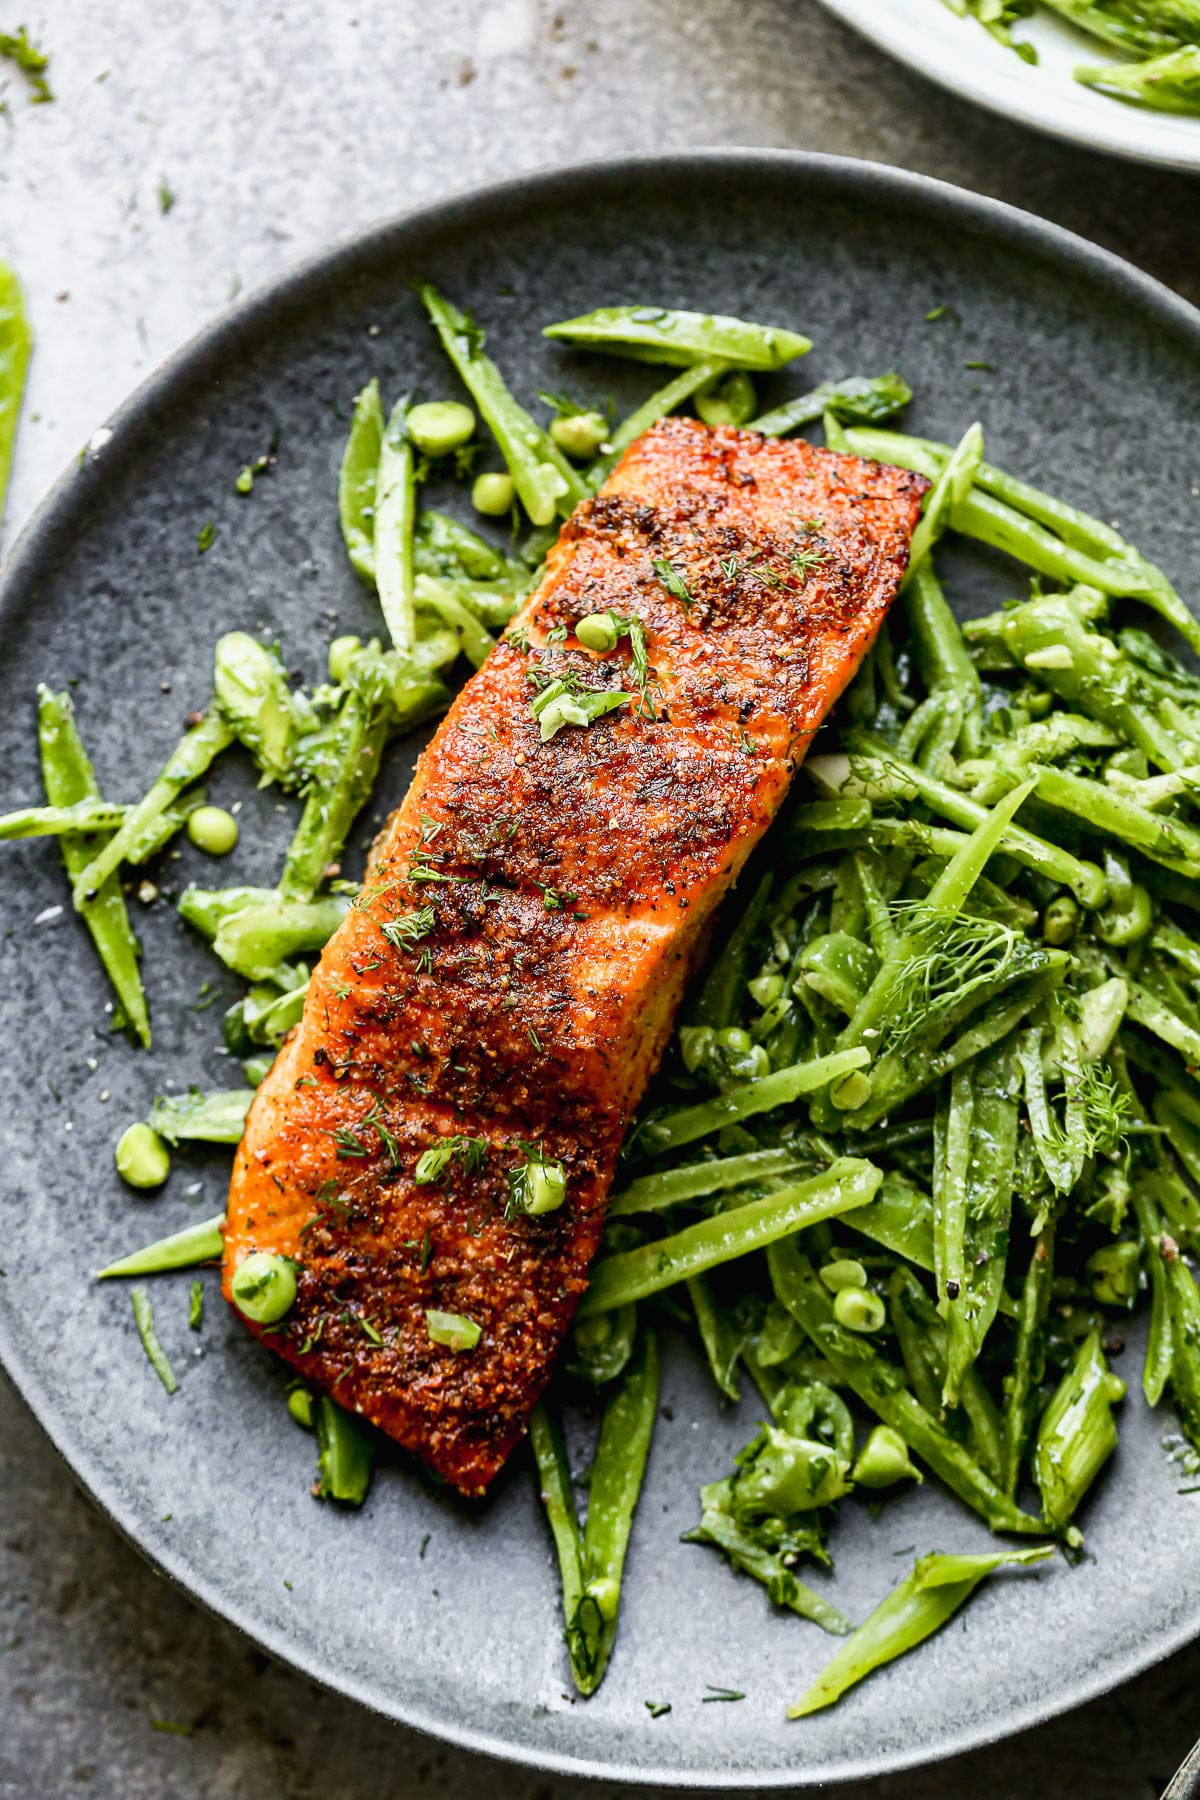 Want salmon that's ultra crispy on the outside, moist on the inside, and abundant with flavor? Head straight the grocery store and pick up the ingredients for our Blackened Air Fryer Salmon with Snap Pea Salad. This bright, spring-forward meal comes together in less than 30 minutes and will certainly find a home in your weekly dinner rotation.&nbsp;